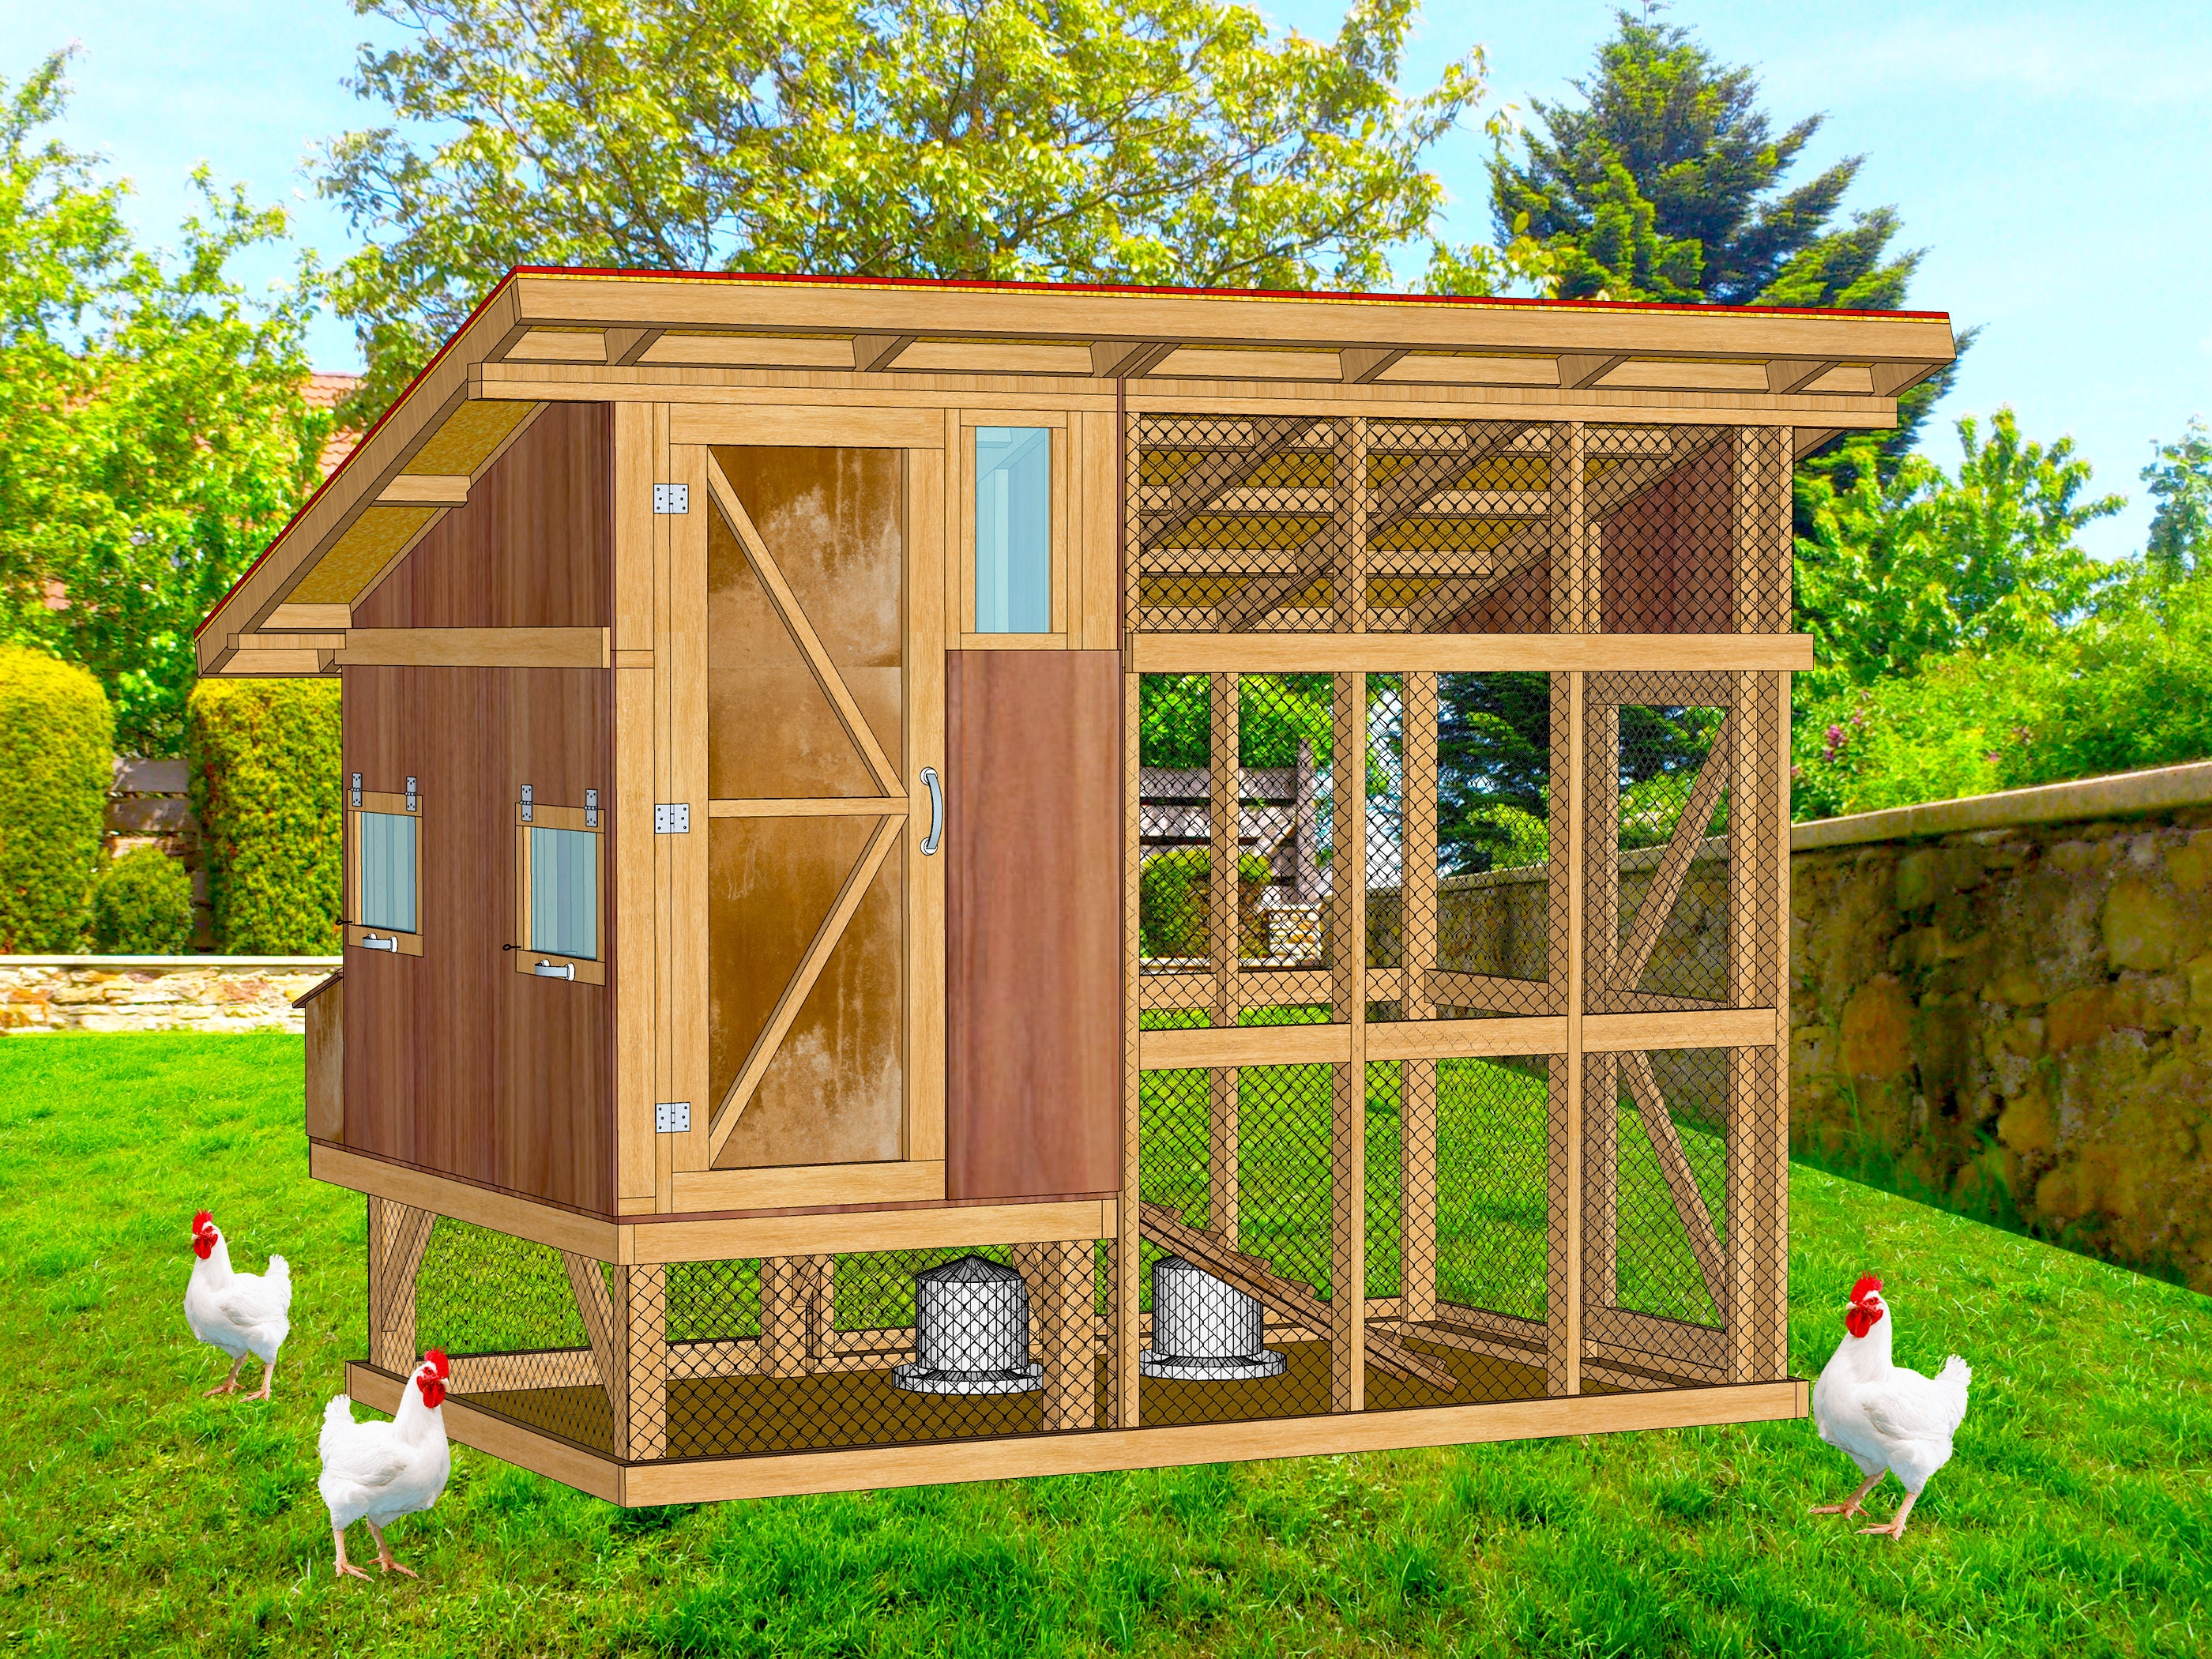 Easy Way To Make Chicken Coop At Home Using Wood and Iron Net